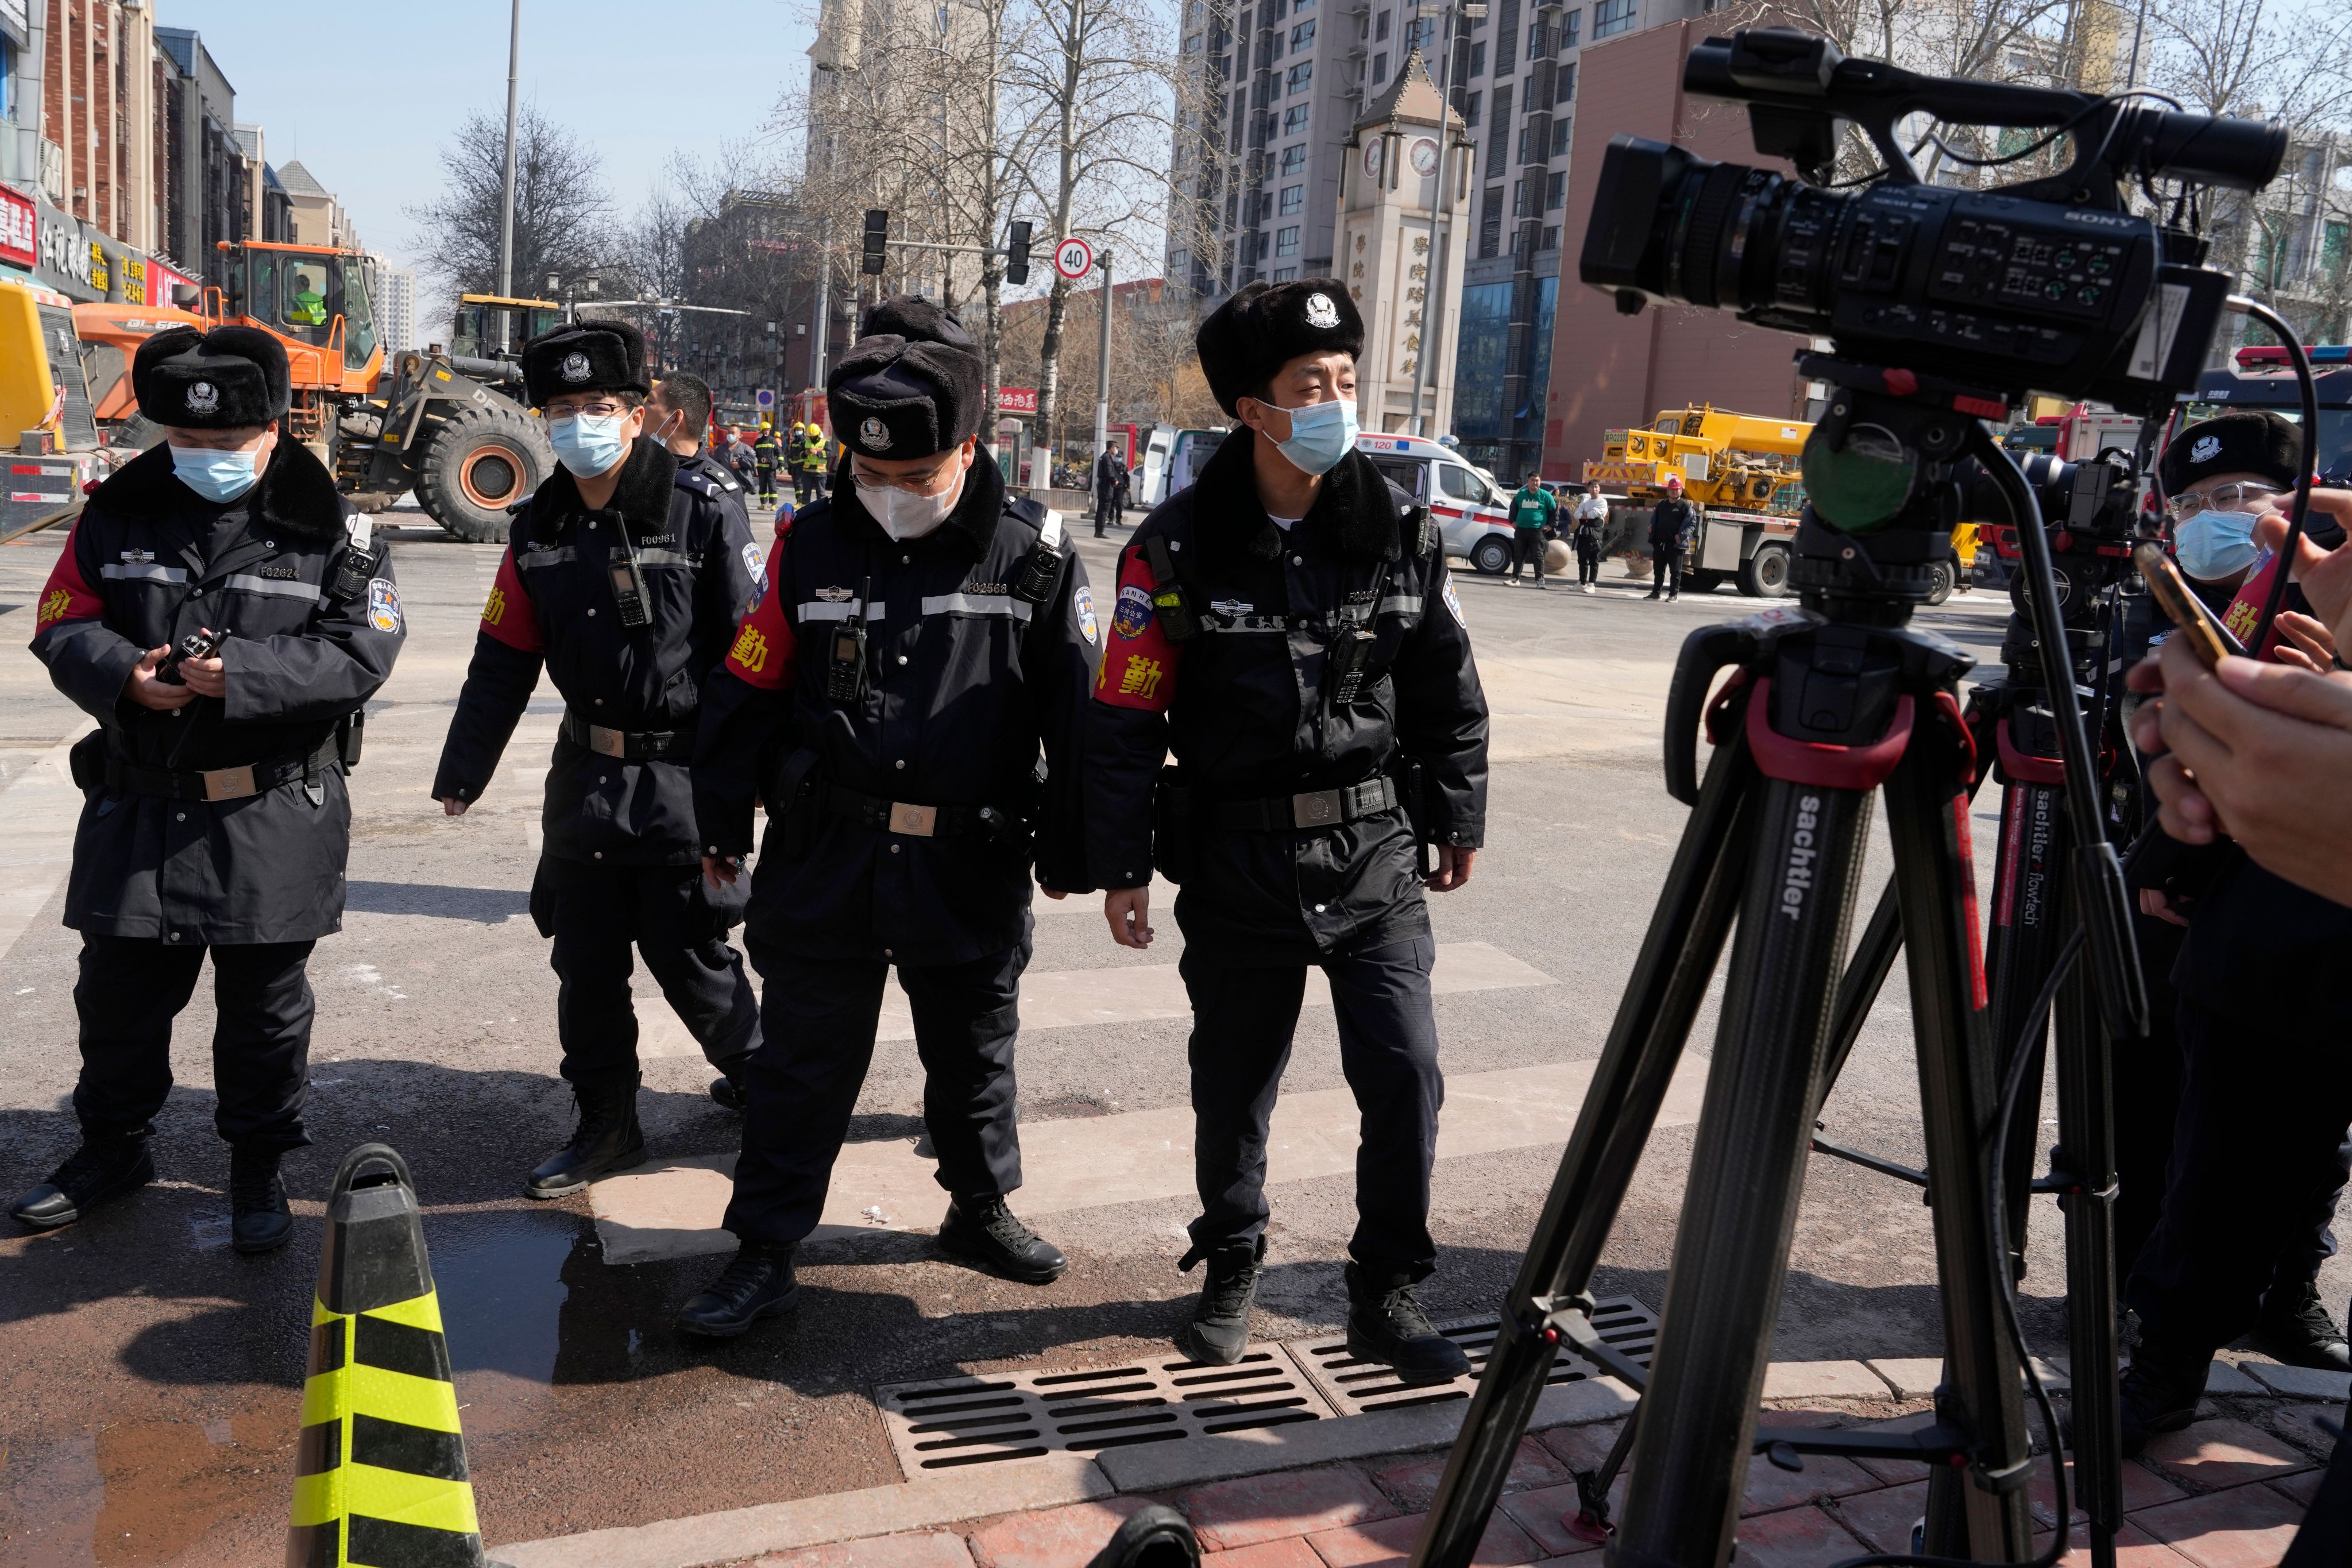 Rare rebuke for Chinese police who harassed state journalists covering gas explosion - Committee to Protect Journalists